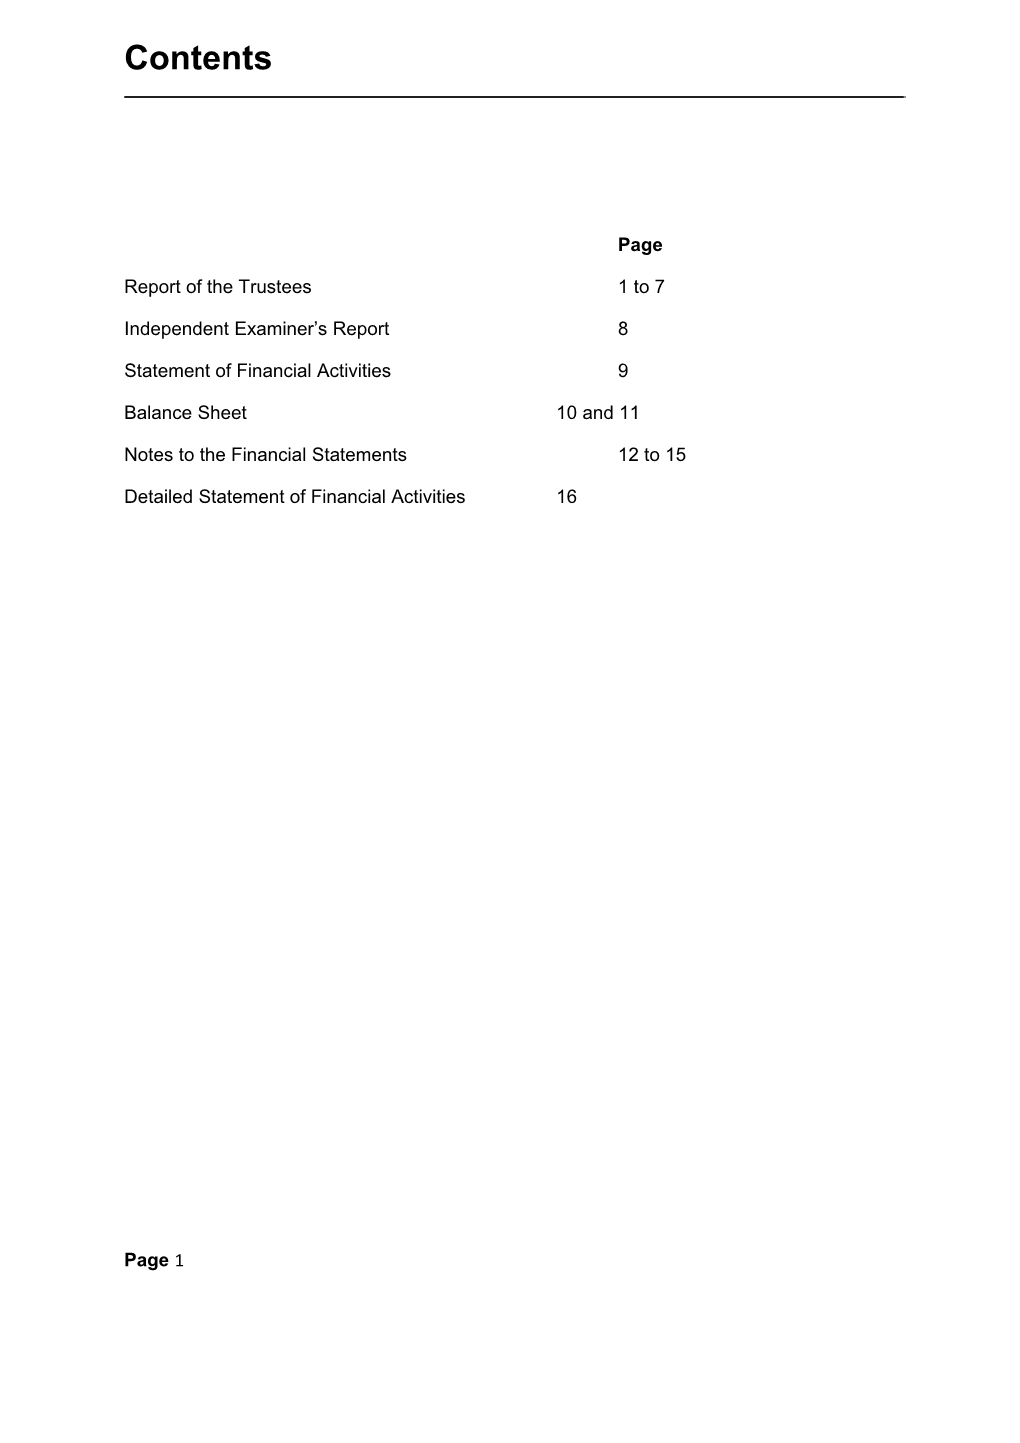 Report of the Trustees1 to 7